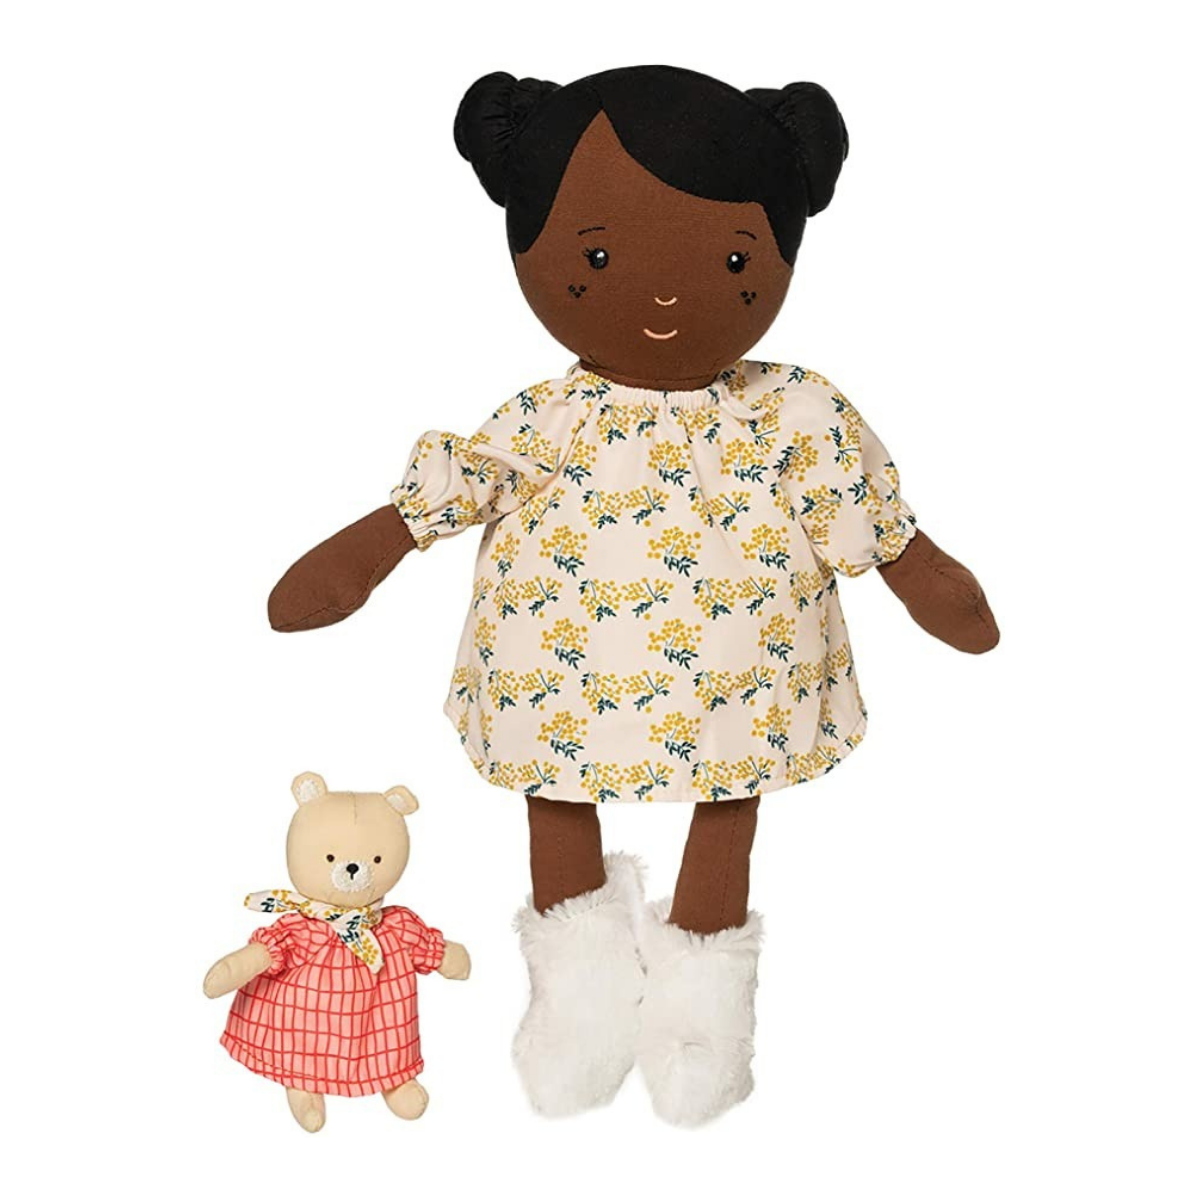 Dolls can help toddlers learn how to nurture and empathize—which is especially meaningful when the toy they’re caring for resembles them. $28, Amazon. <a href="https://www.amazon.com/Manhattan-Toy-Playdate-Washable-Companion/dp/B085HHPB2L/ref=asc_df_B085HHPB2L/">Get it now!</a>